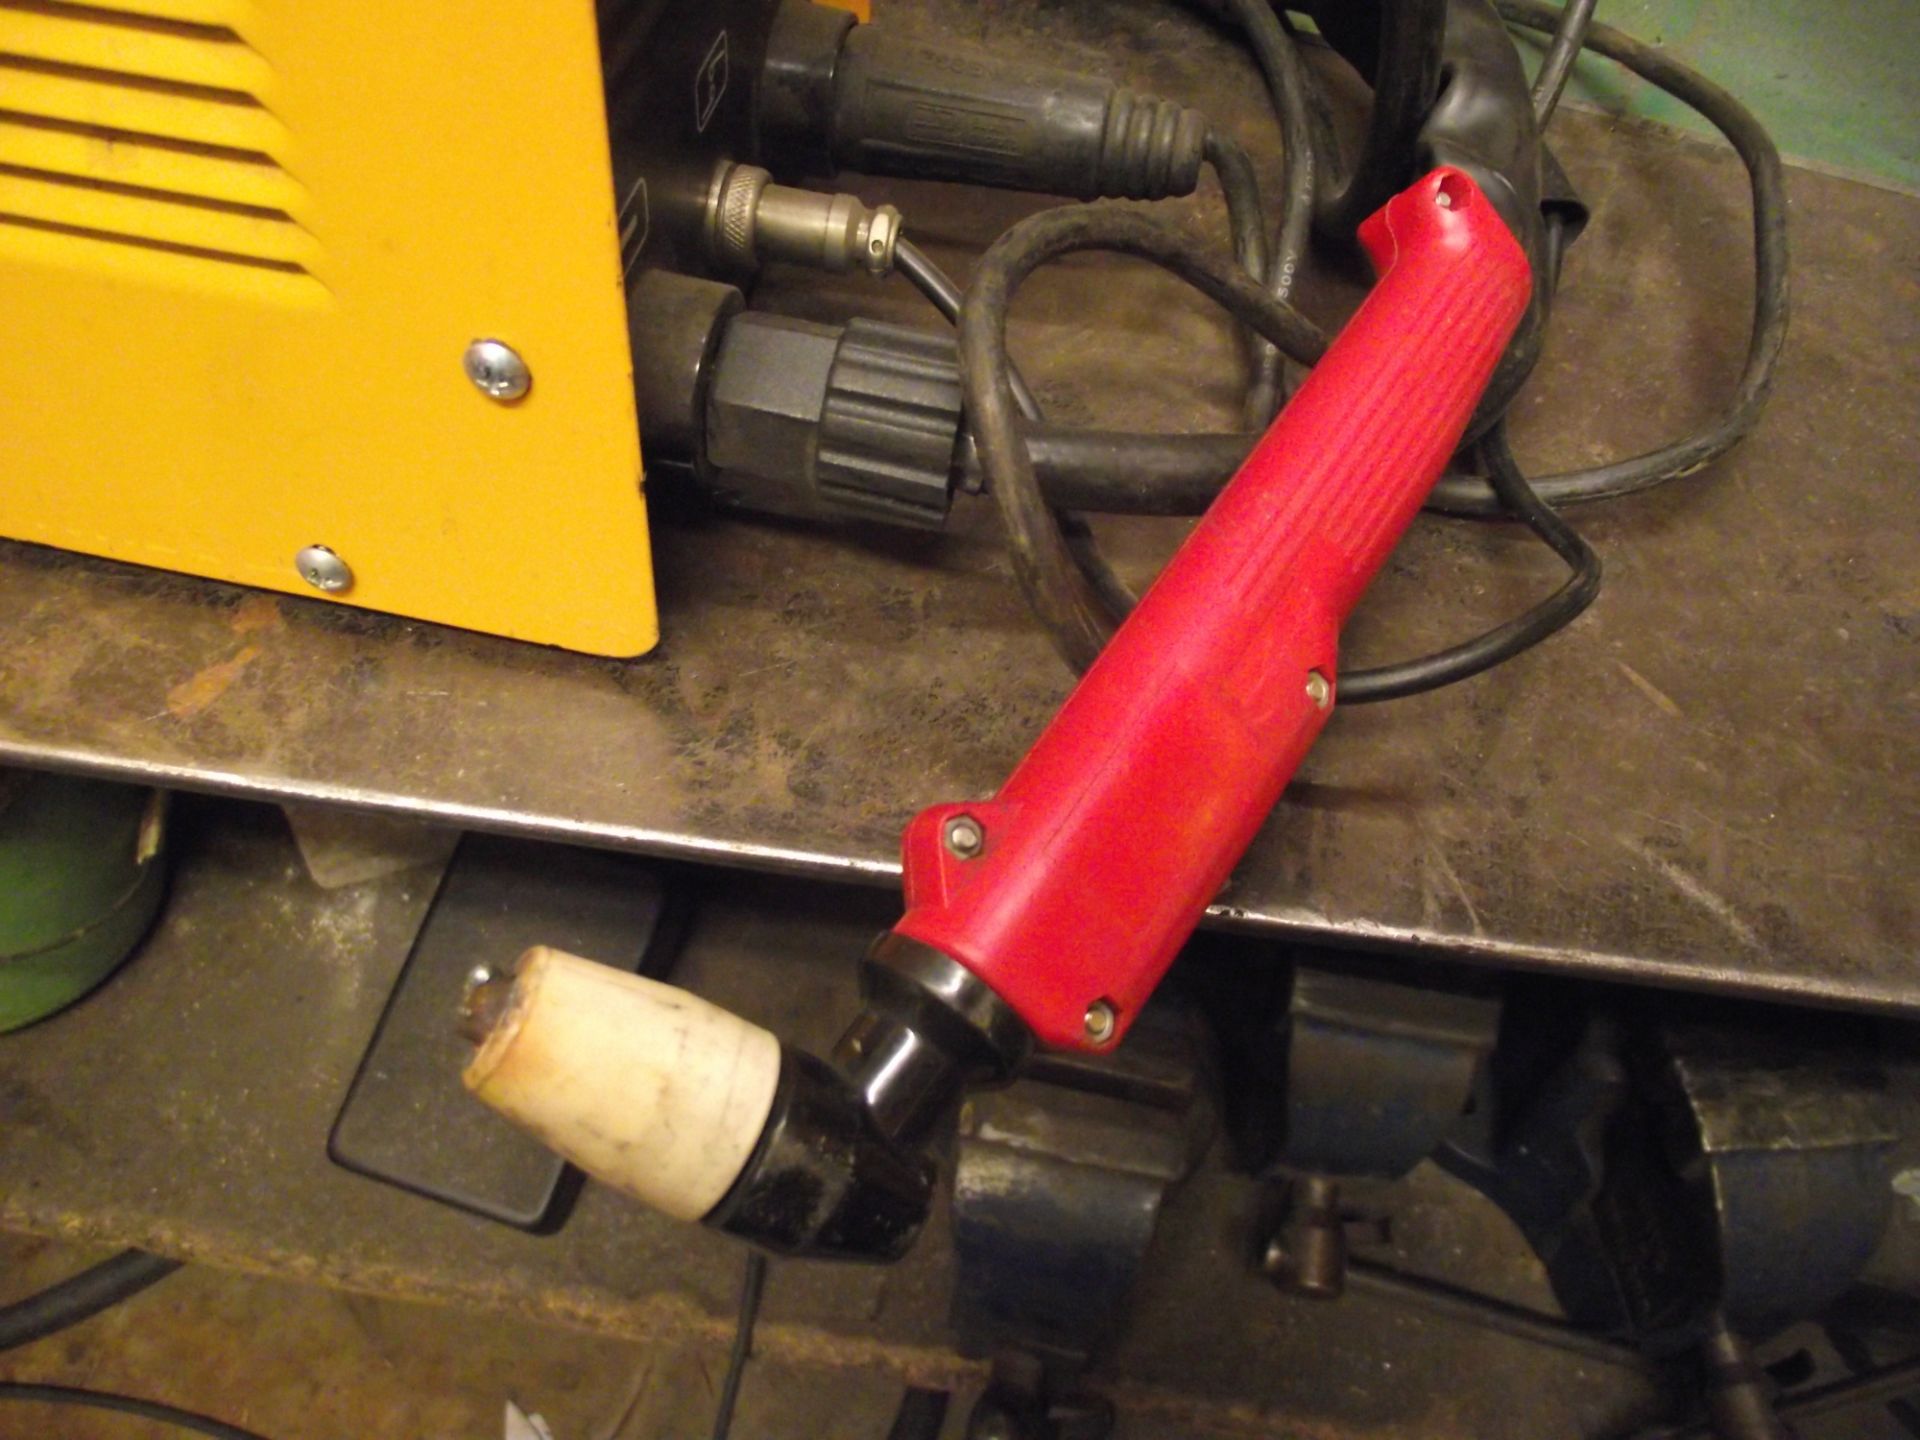 Giant CUT 40 DC Inverter Plasma Cutter cw Torch - Image 3 of 3